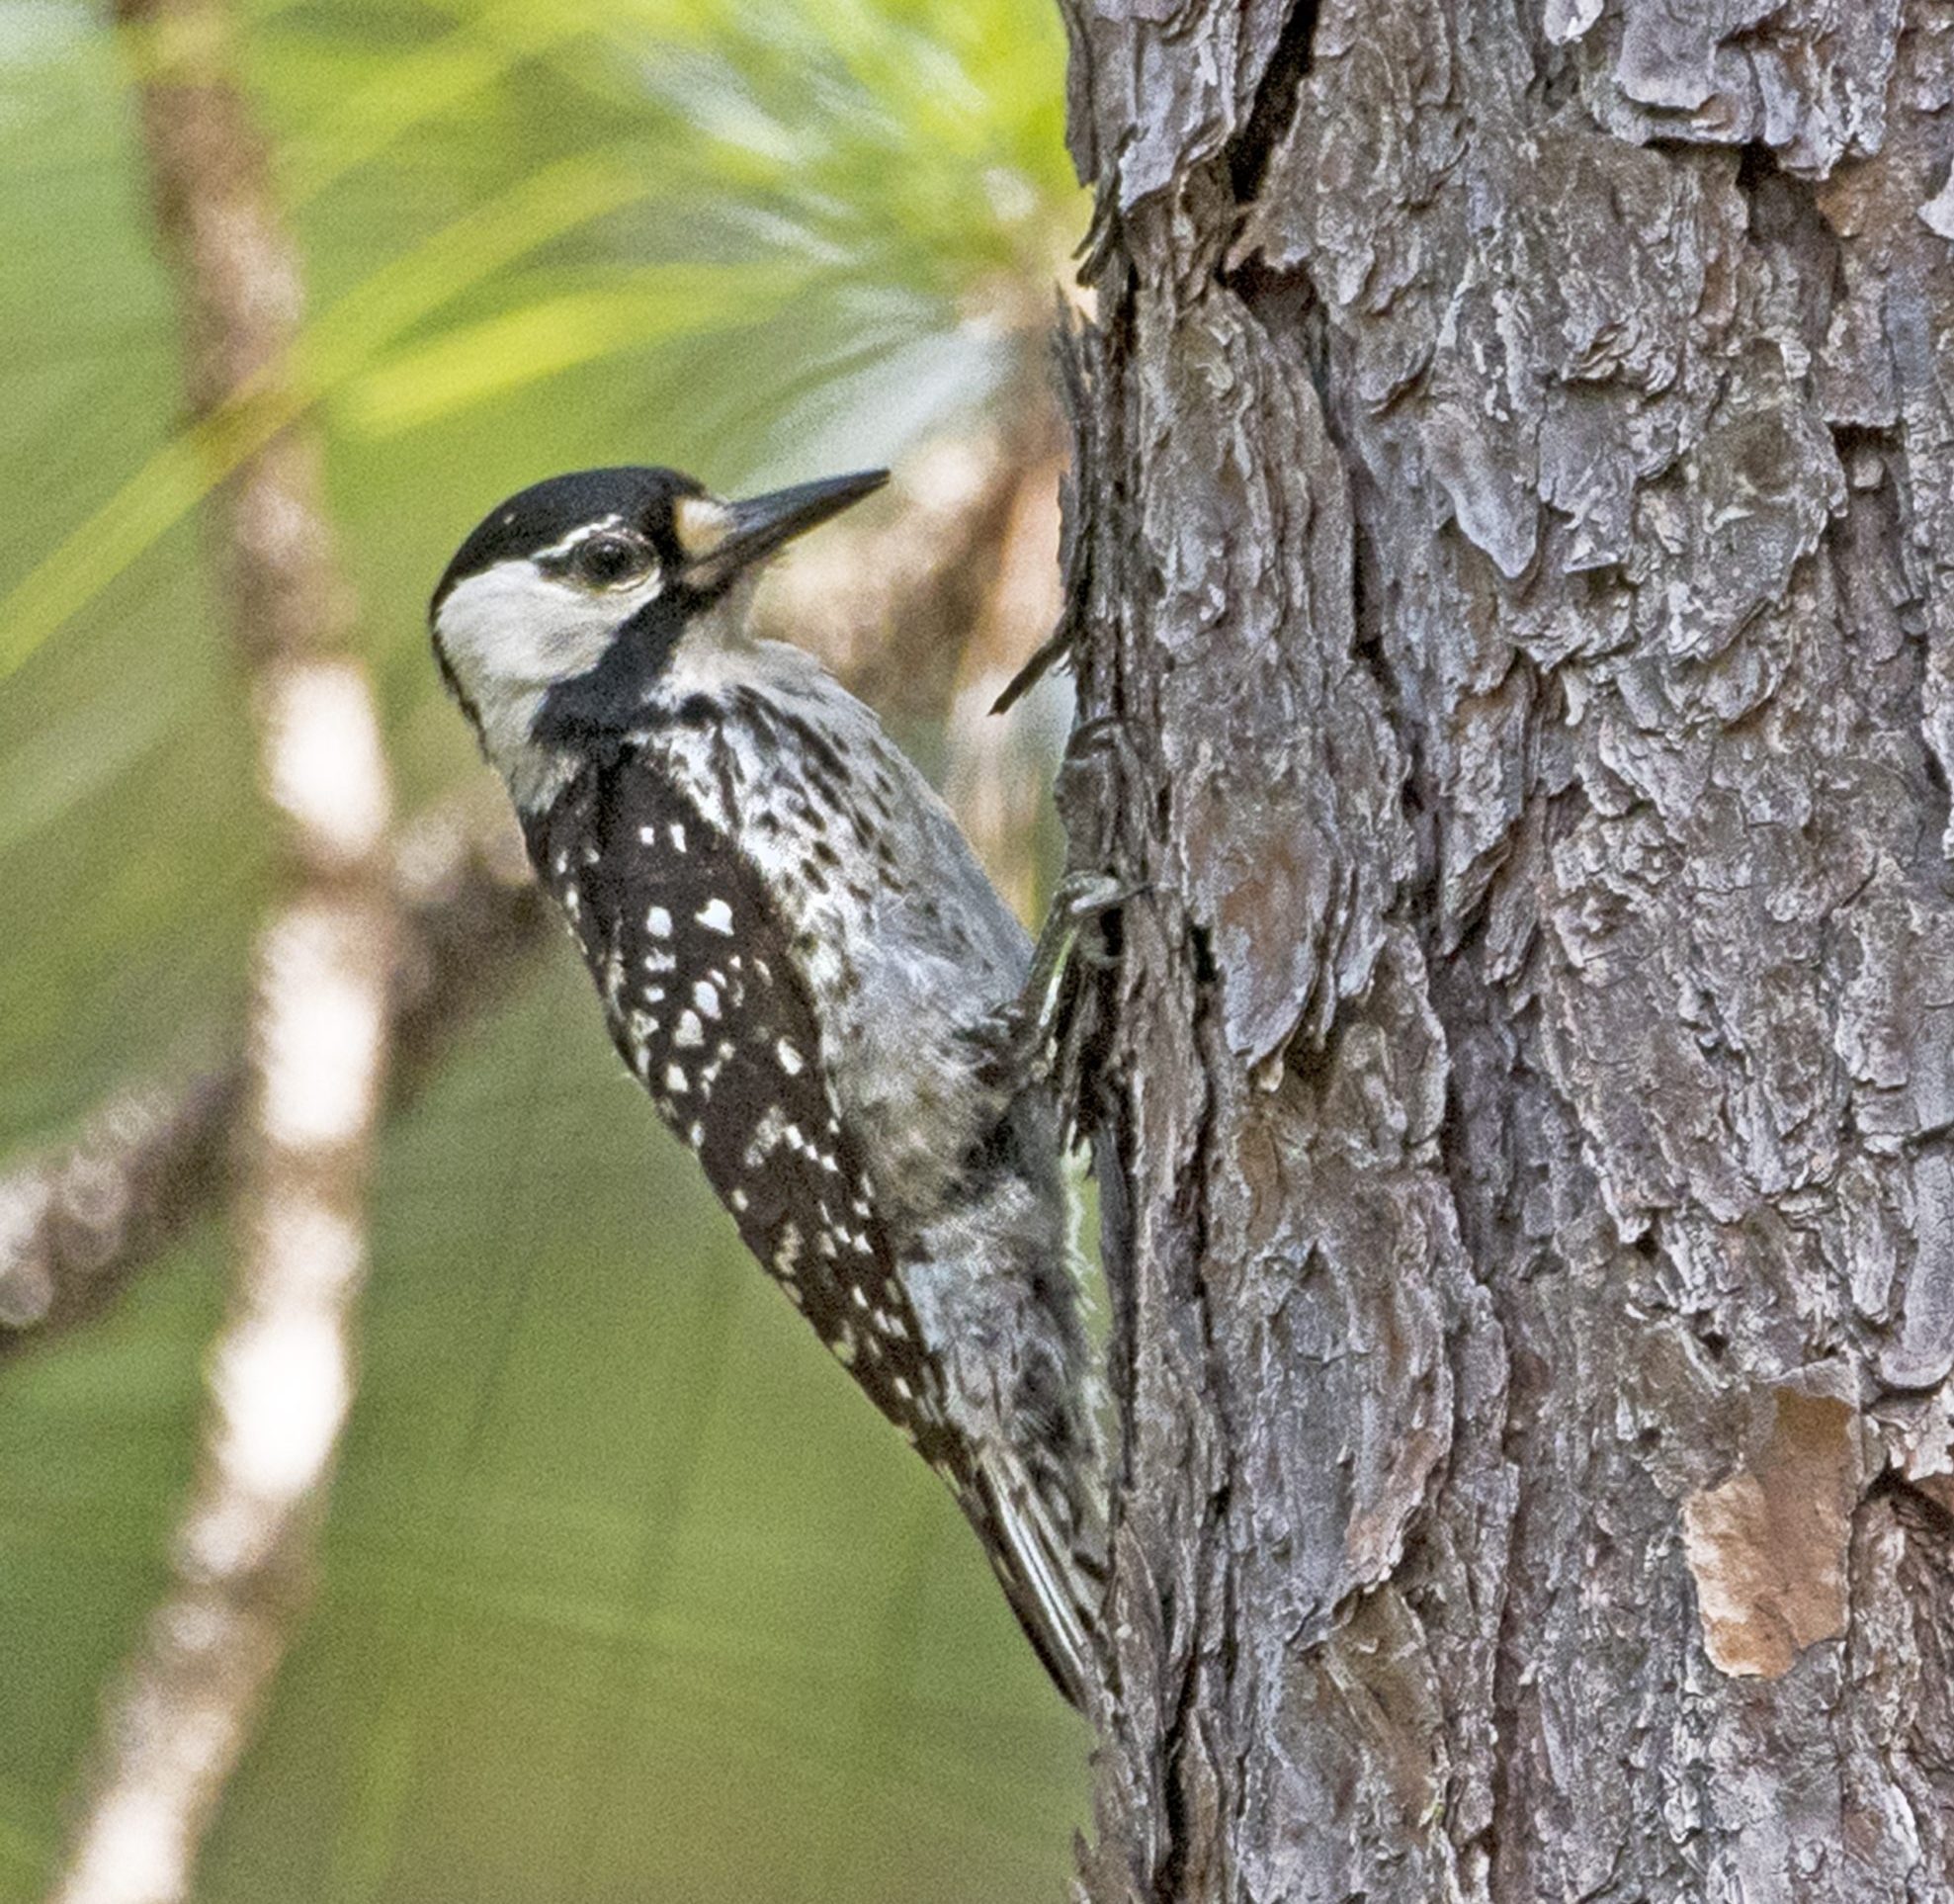 How to Identify a Rare Red-Cockaded Woodpecker